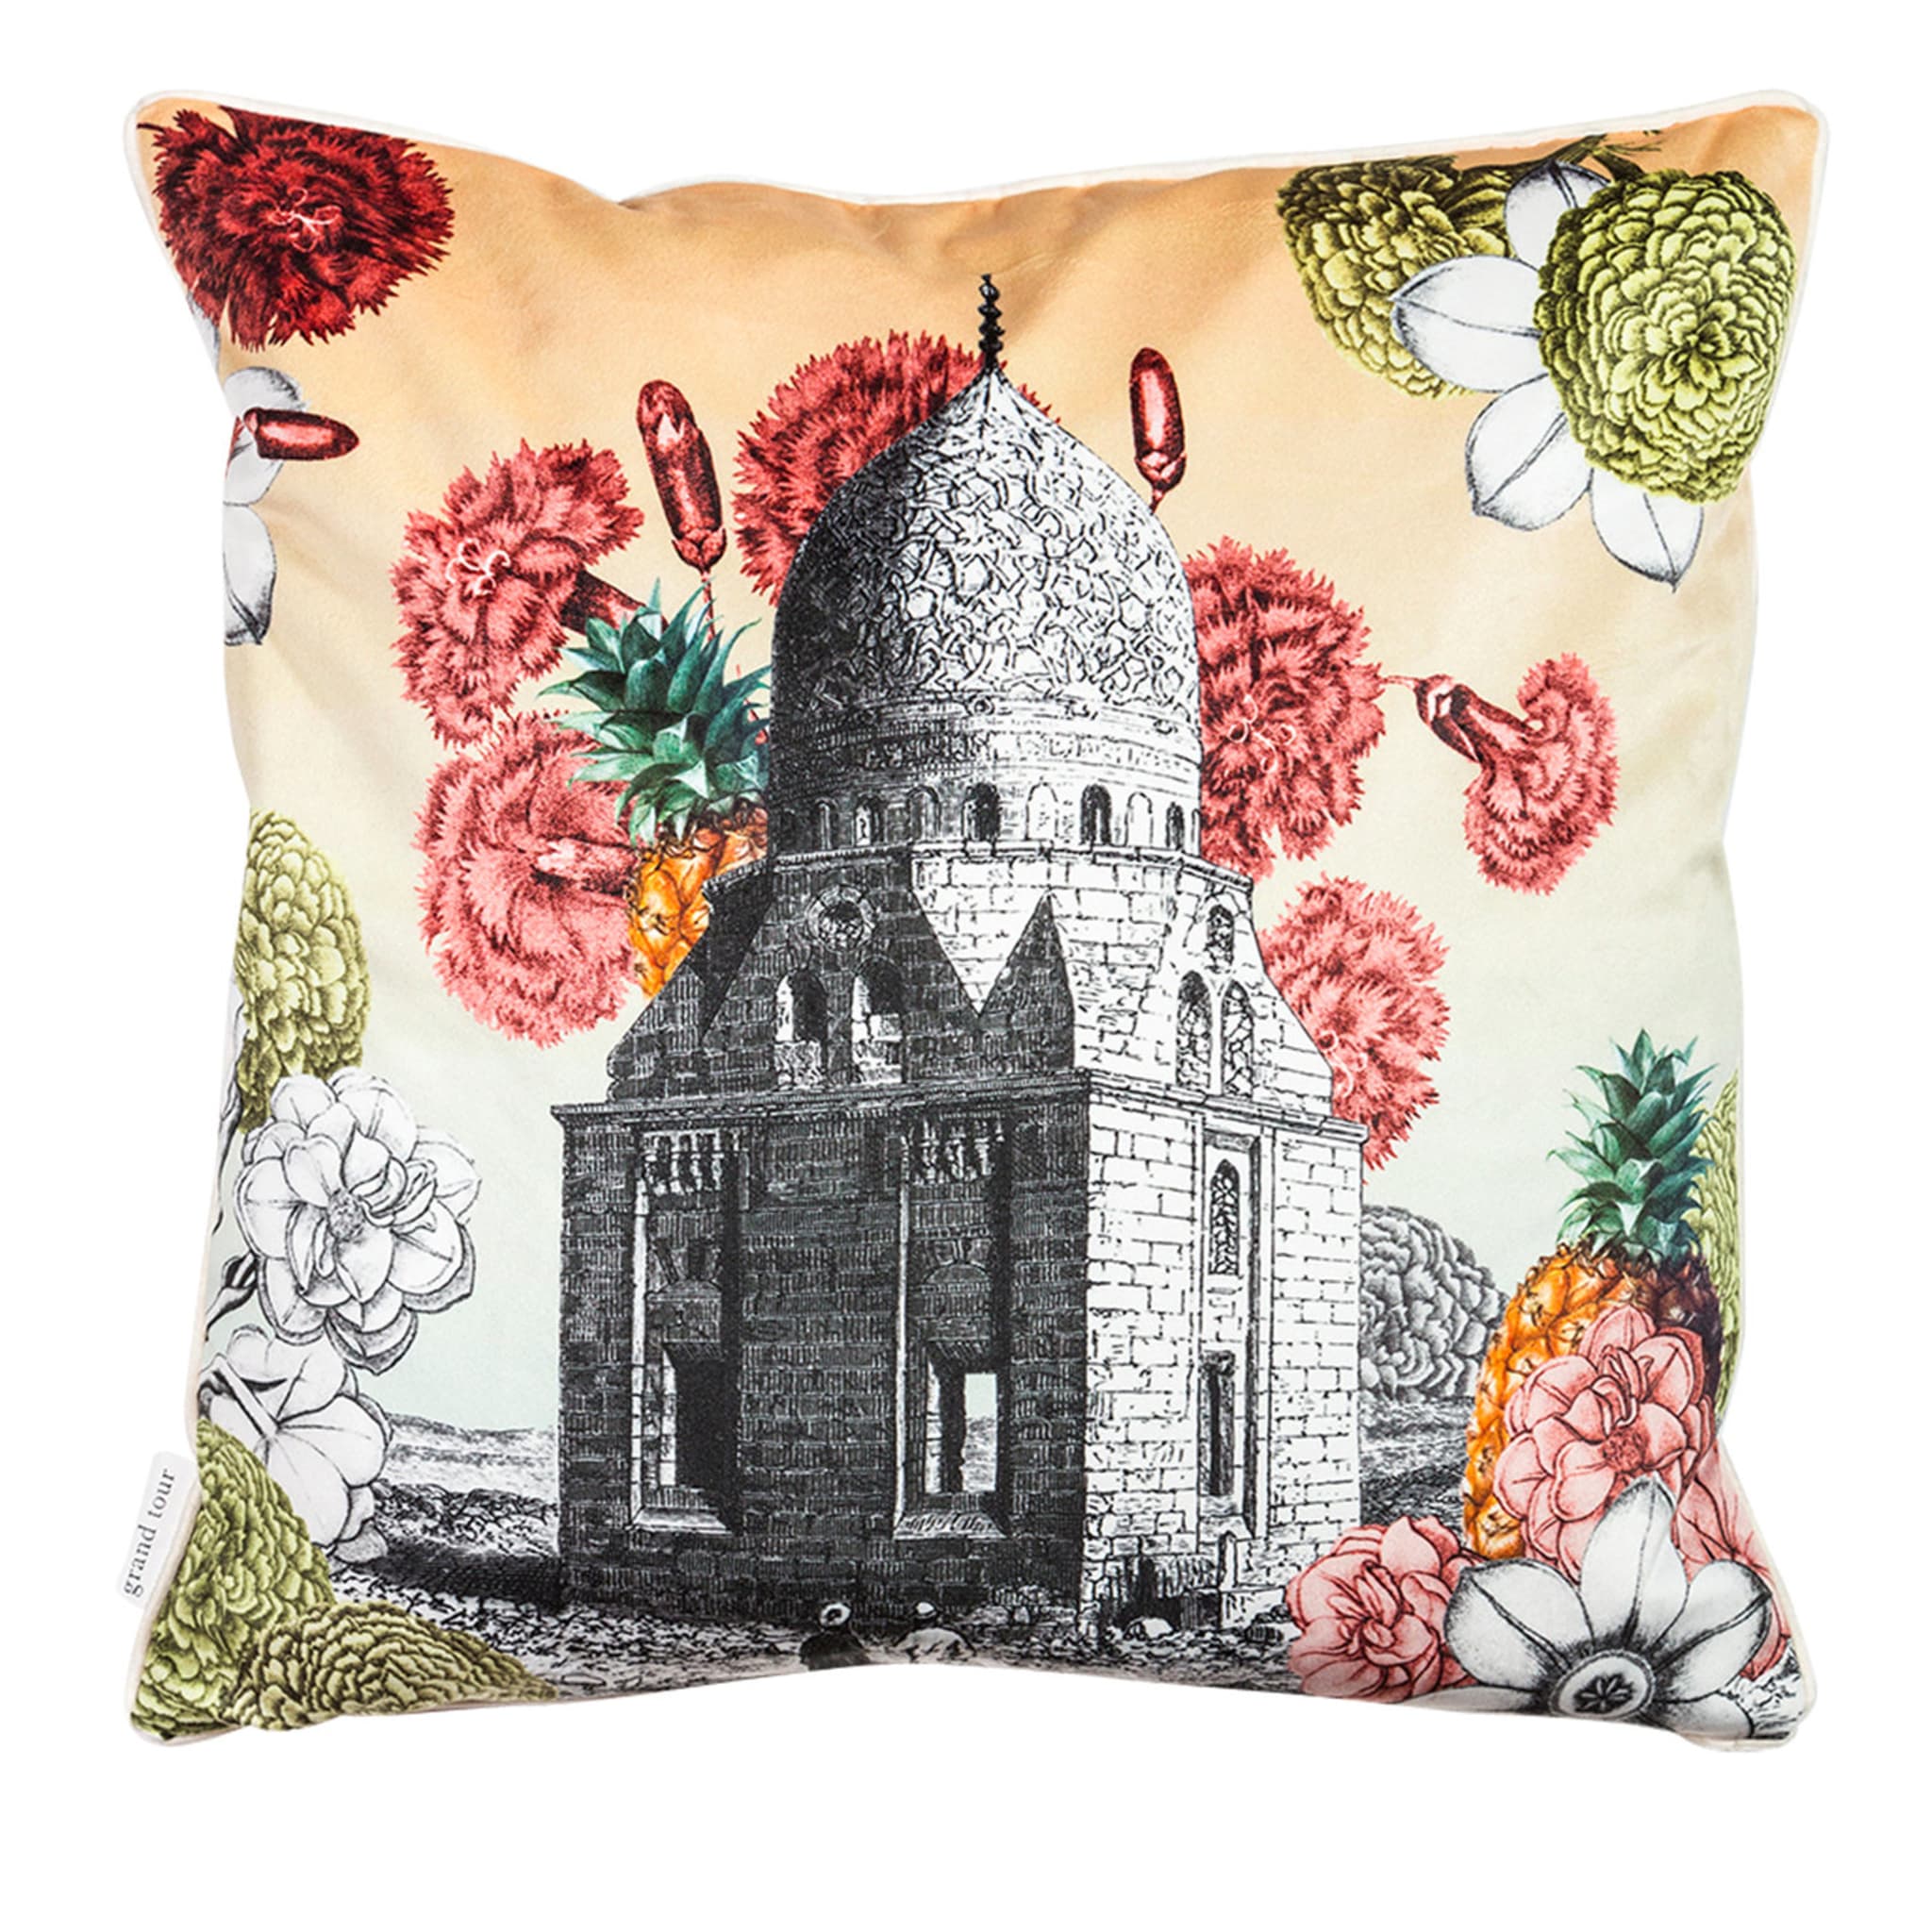 Cairo Velvet Cushion With Landscape And Flowers #1 - Main view